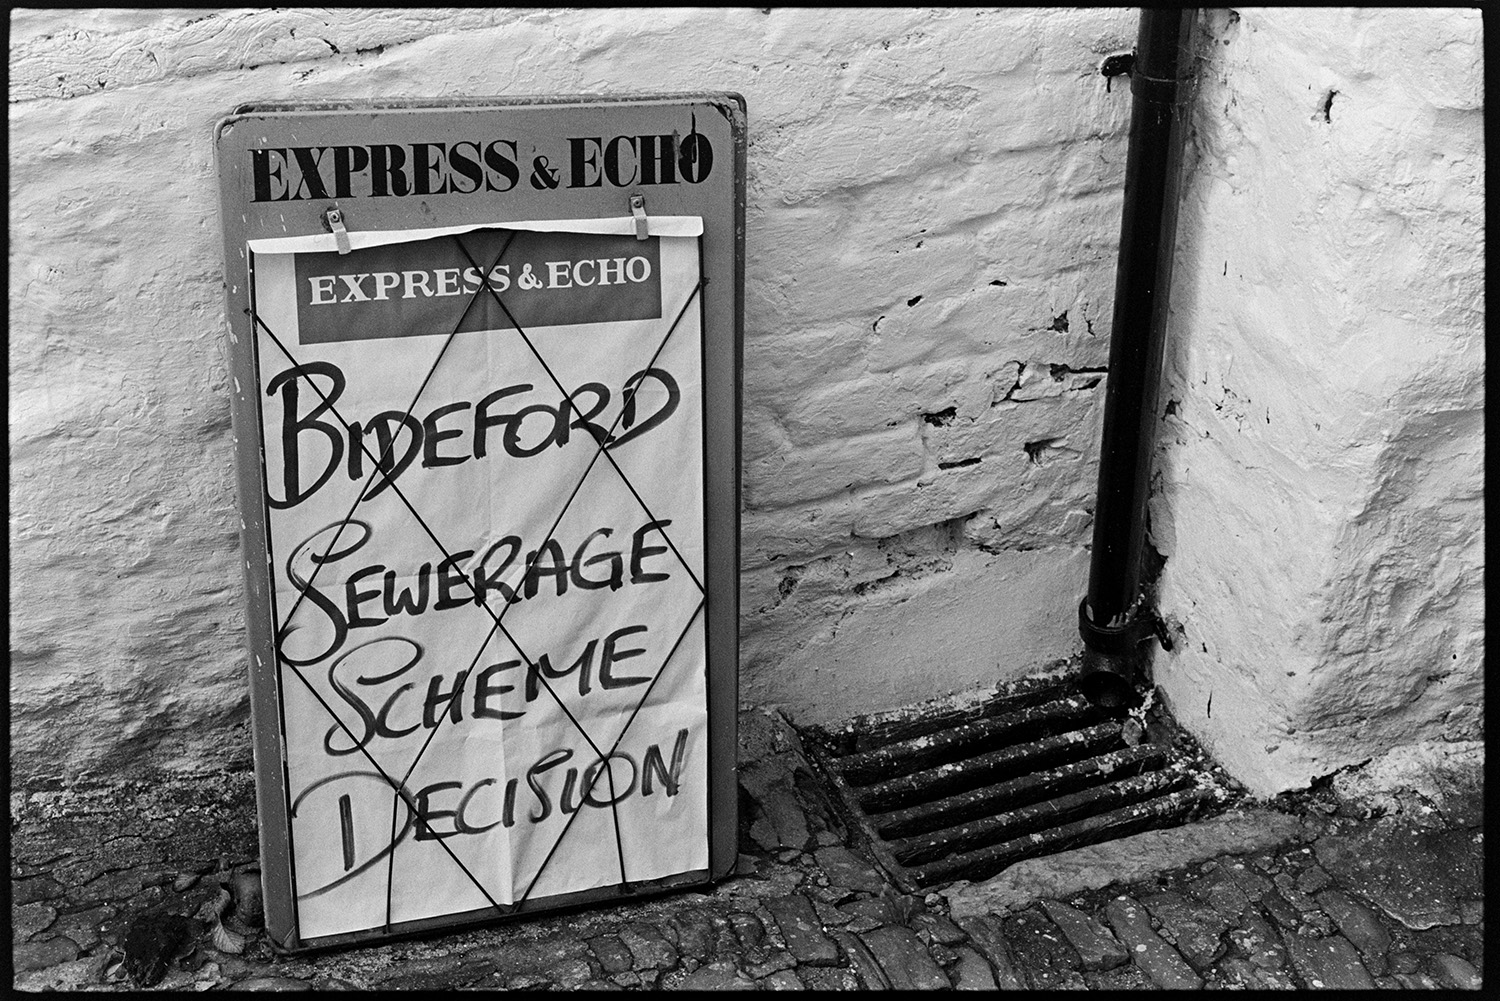 Newspaper hoarding and drain. 
[A newspaper hoarding with the headline 'Bideford Sewerage Scheme Decision' propped against a wall next to a drain with a drainpipe, in Mill Street, Bideford.]